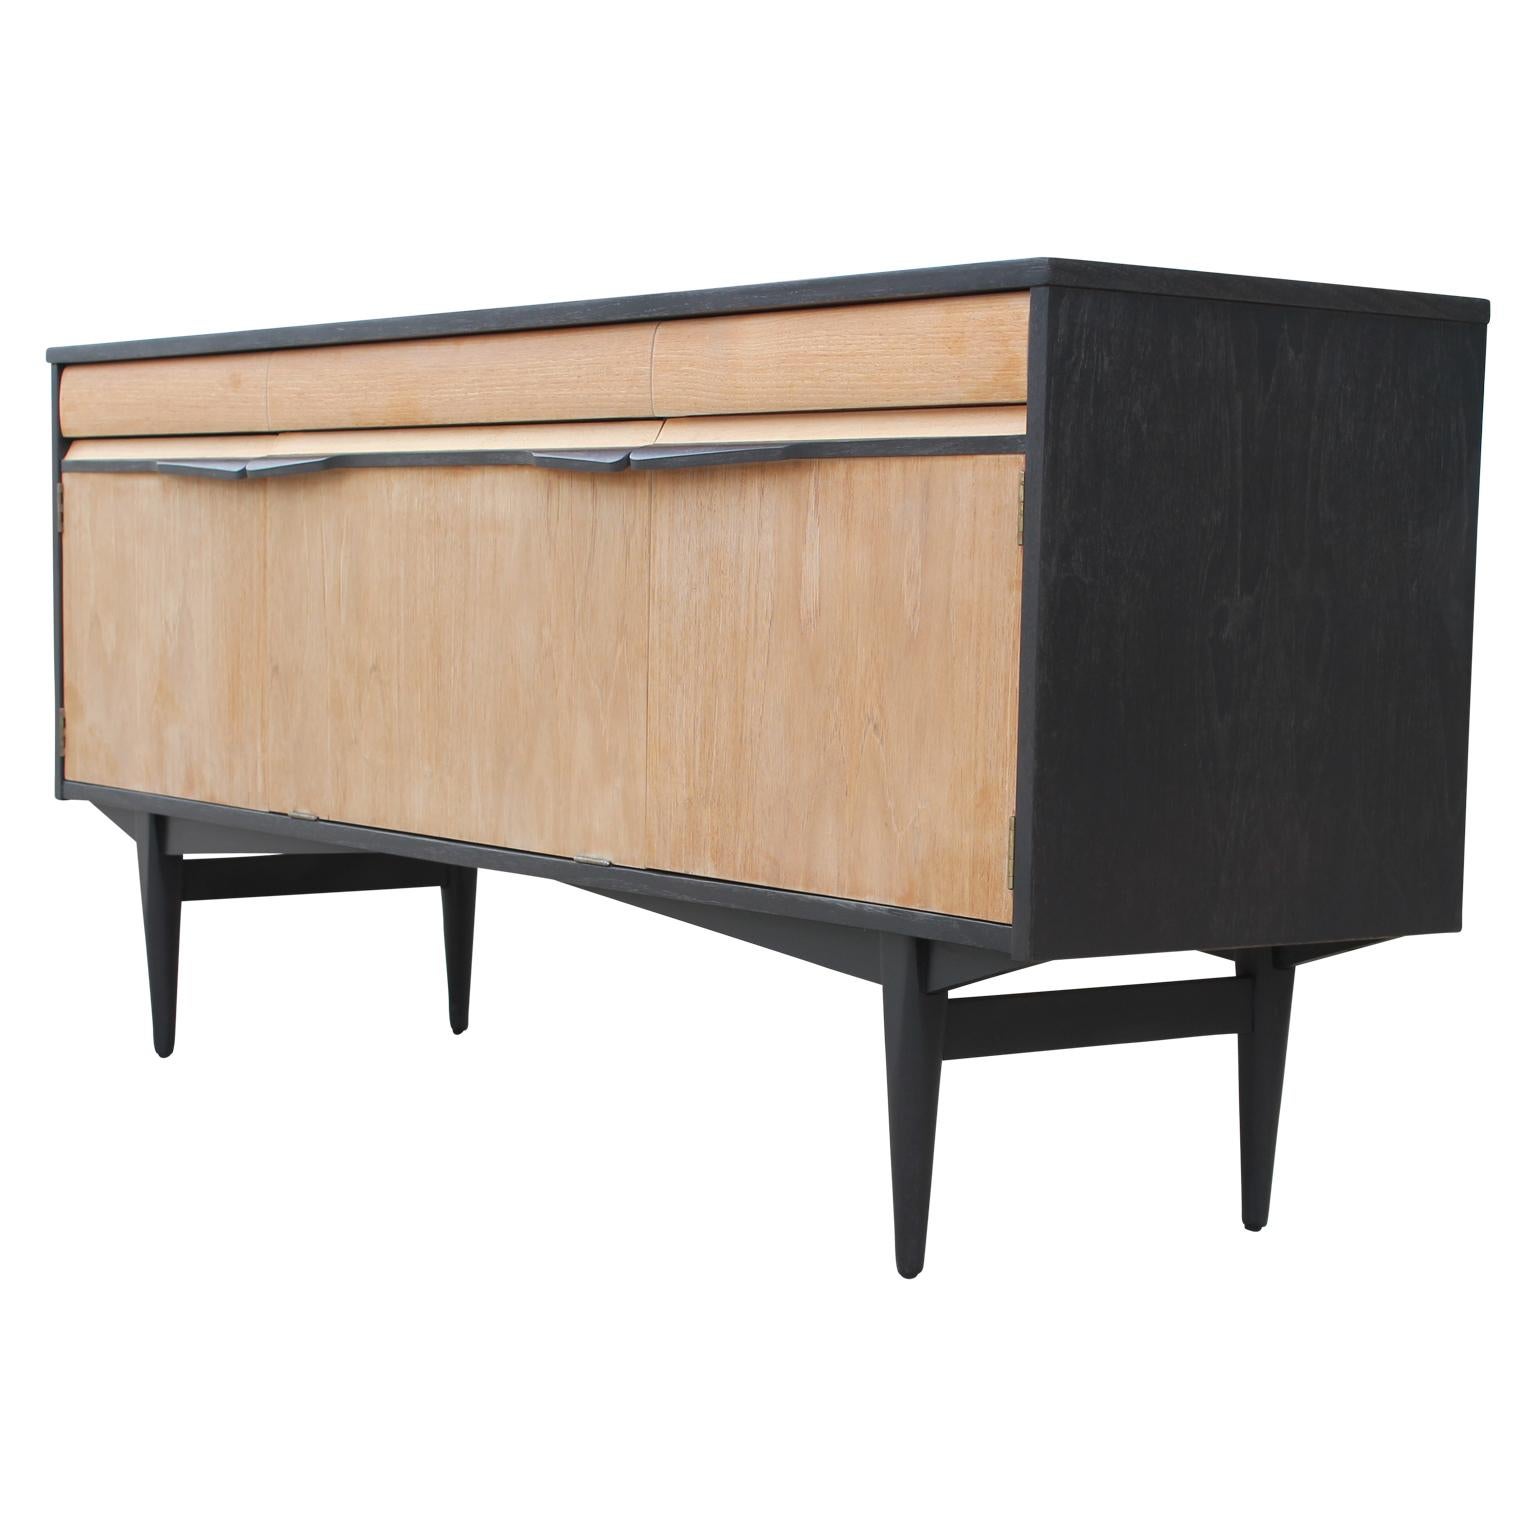 Mid-Century Modern Two-Tone Clean Lined Credenza or Sideboard with Three Drawers (Moderne der Mitte des Jahrhunderts)